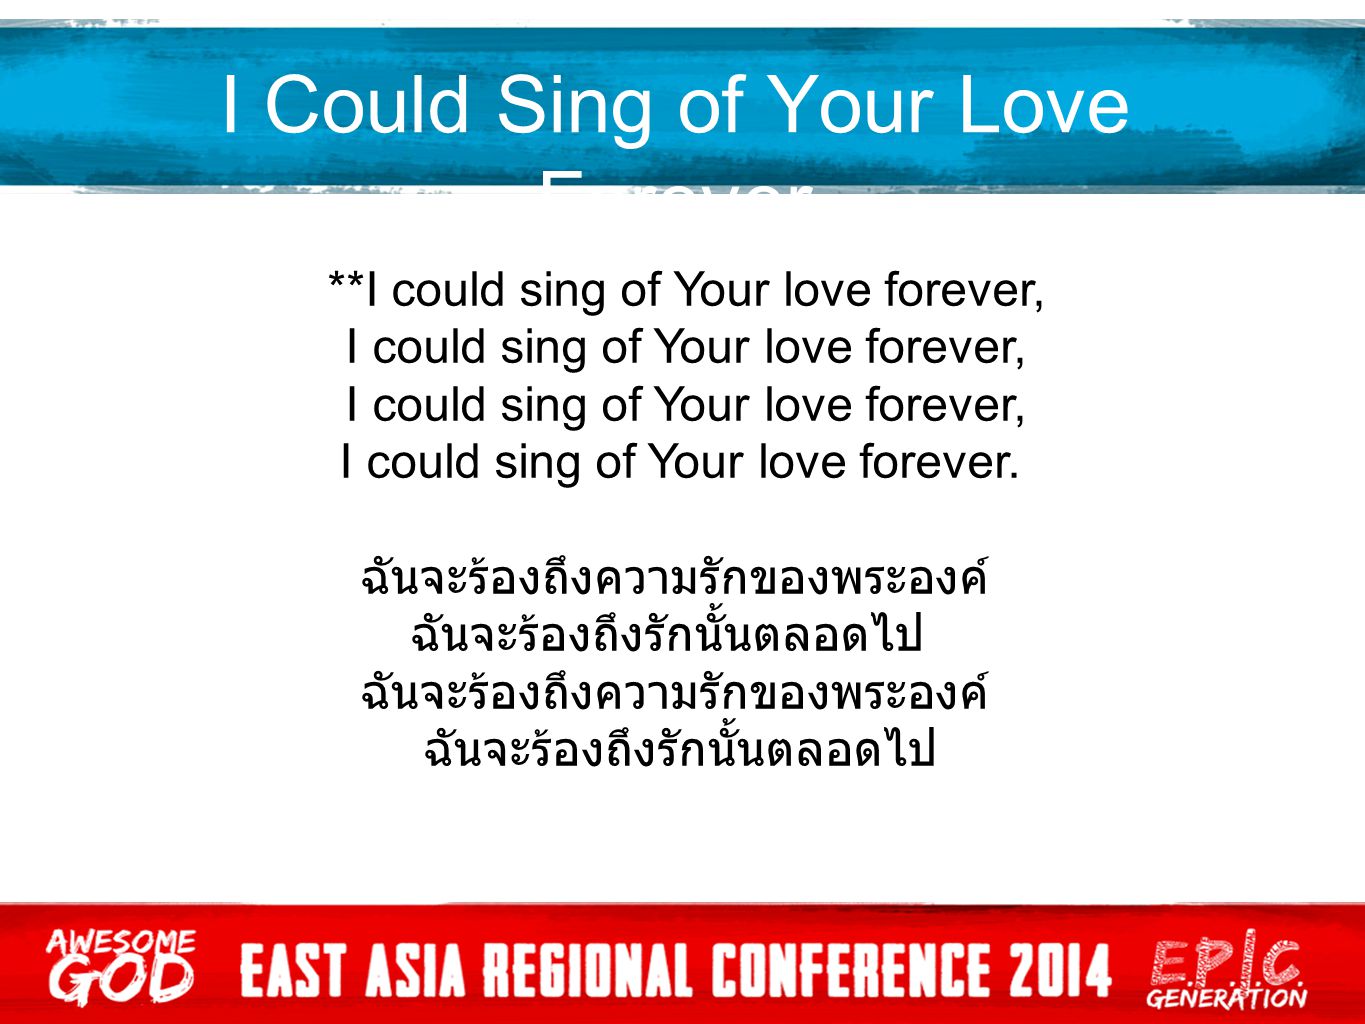 I Could Sing of Your Love Forever